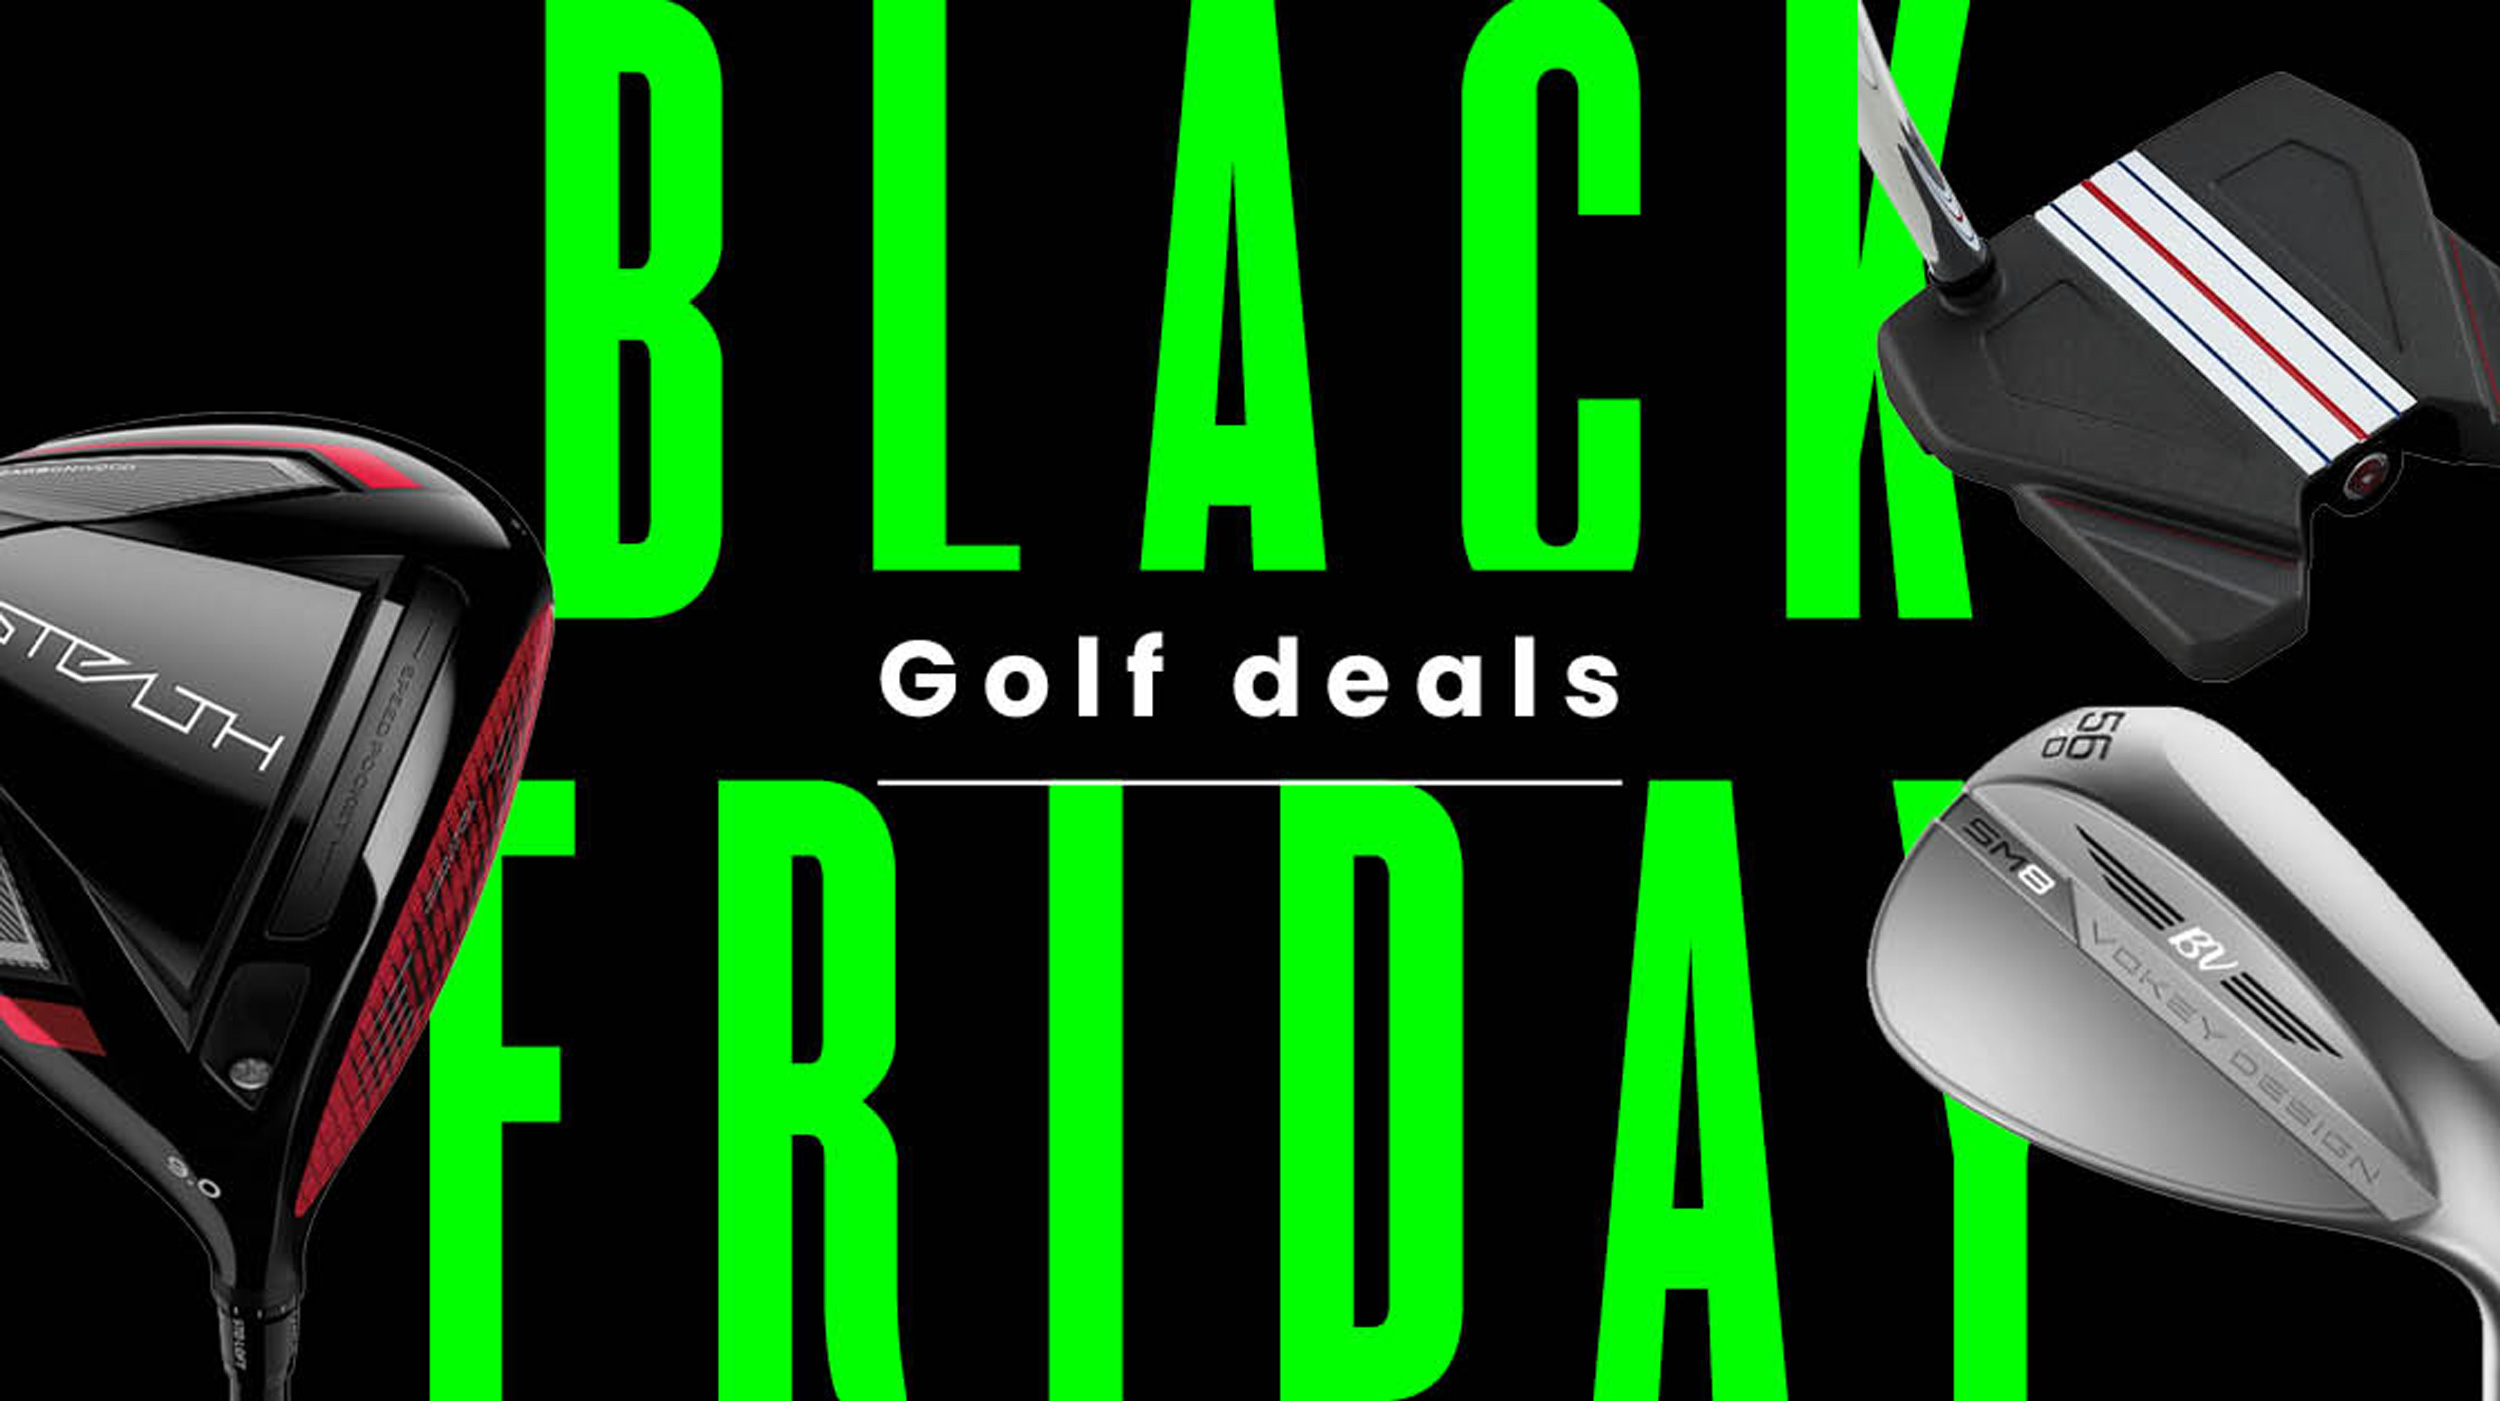 Save big on golf equipment at Scottsdale Golf Course's Black Friday sale